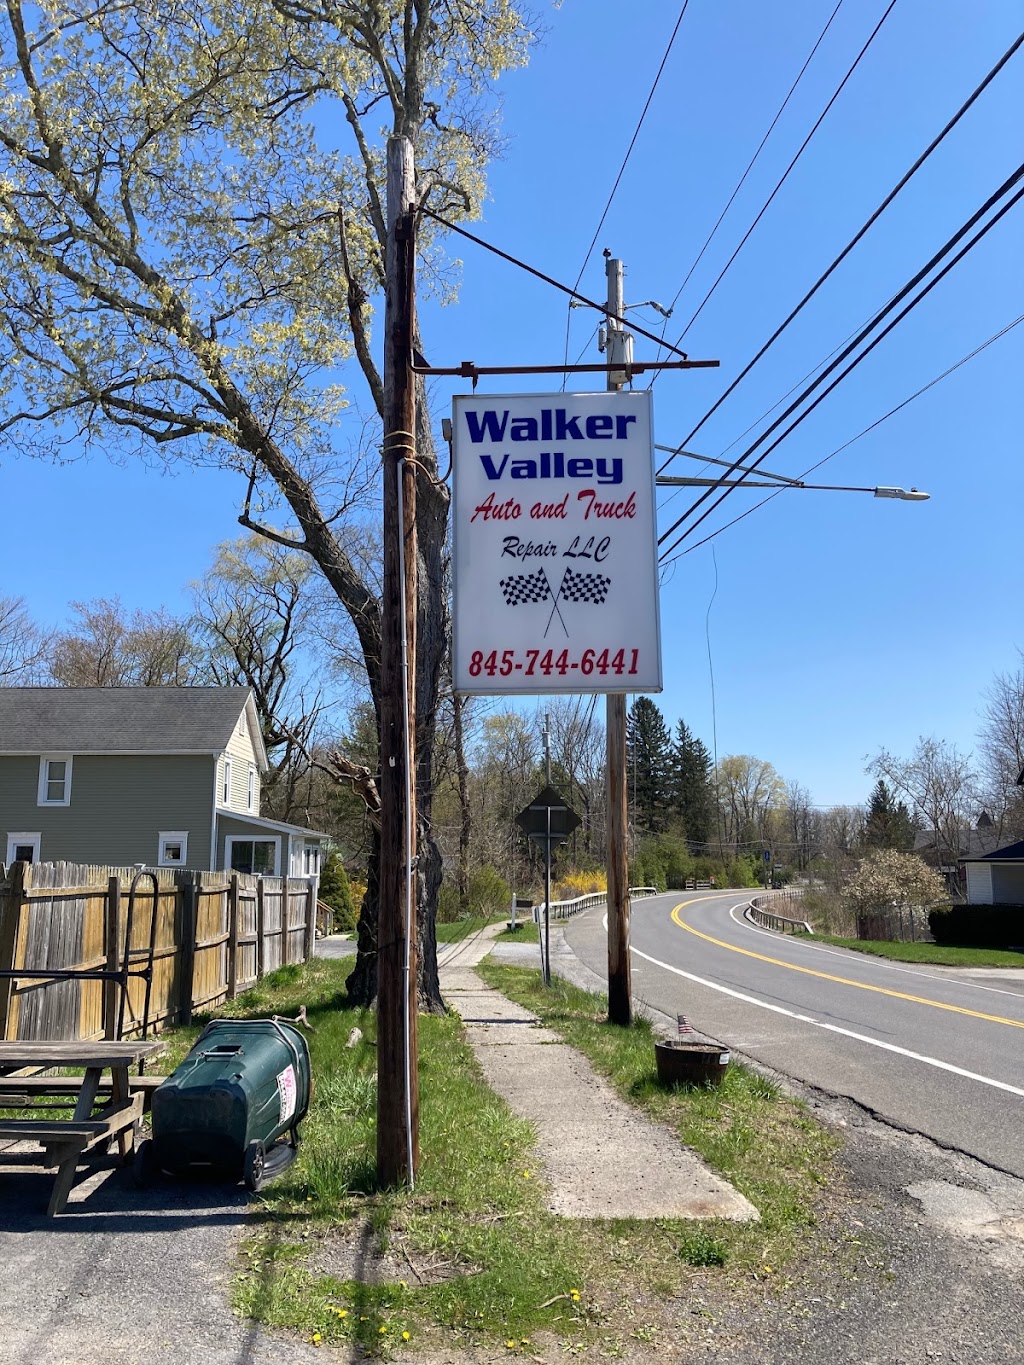 Walker Valley Auto and Truck Repair | 3670 NY-52, Walker Valley, NY 12588 | Phone: (845) 744-6441